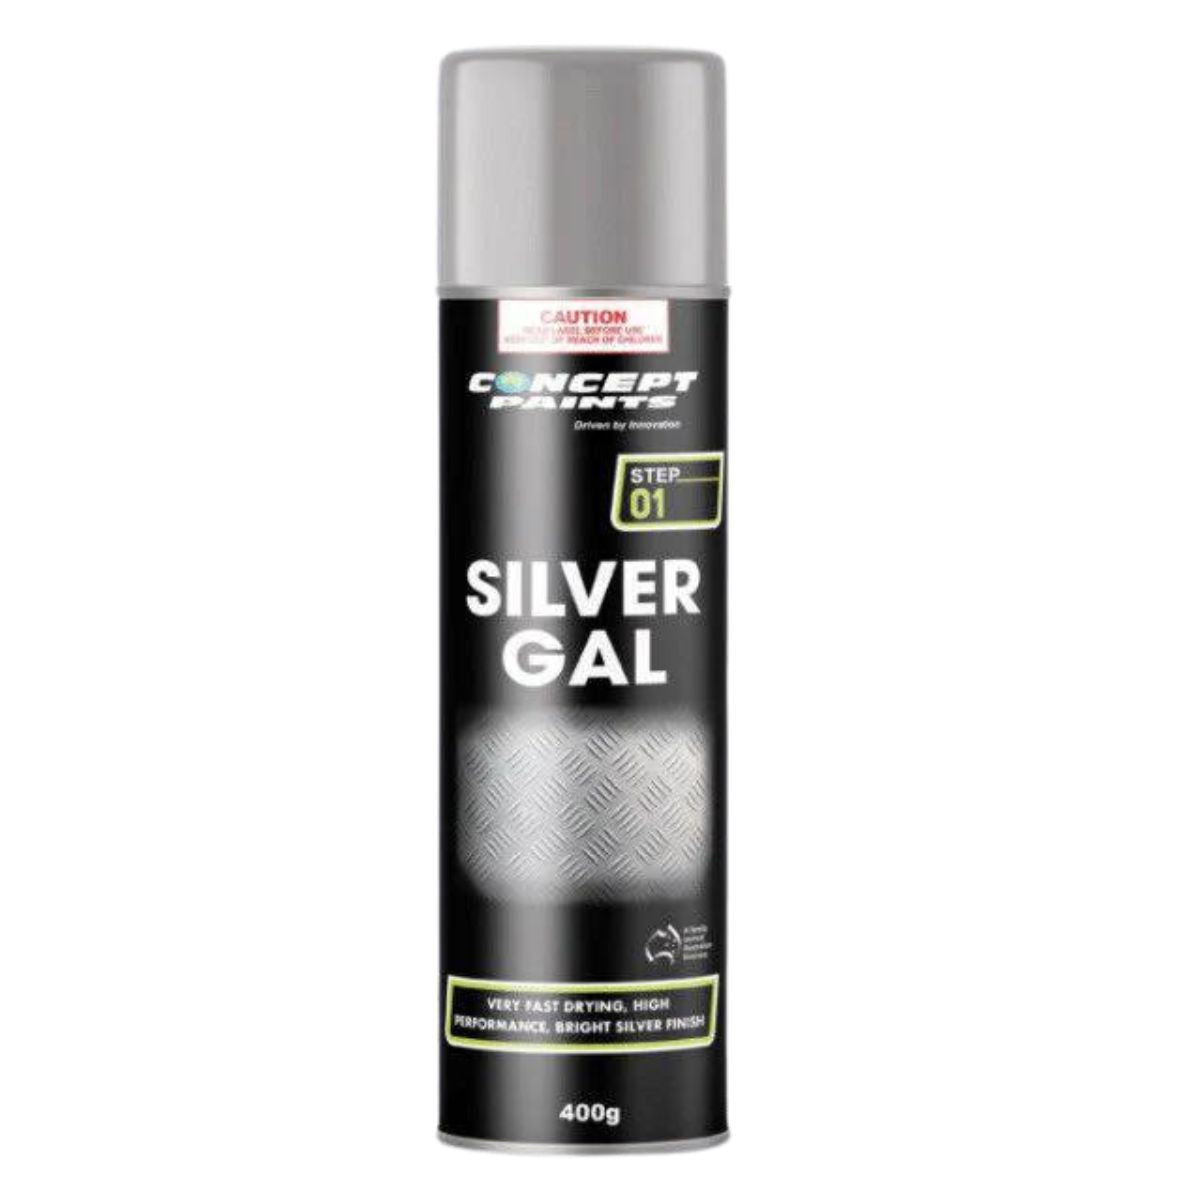 Concept Paints Silver Gal 400g - South East Clearance Centre